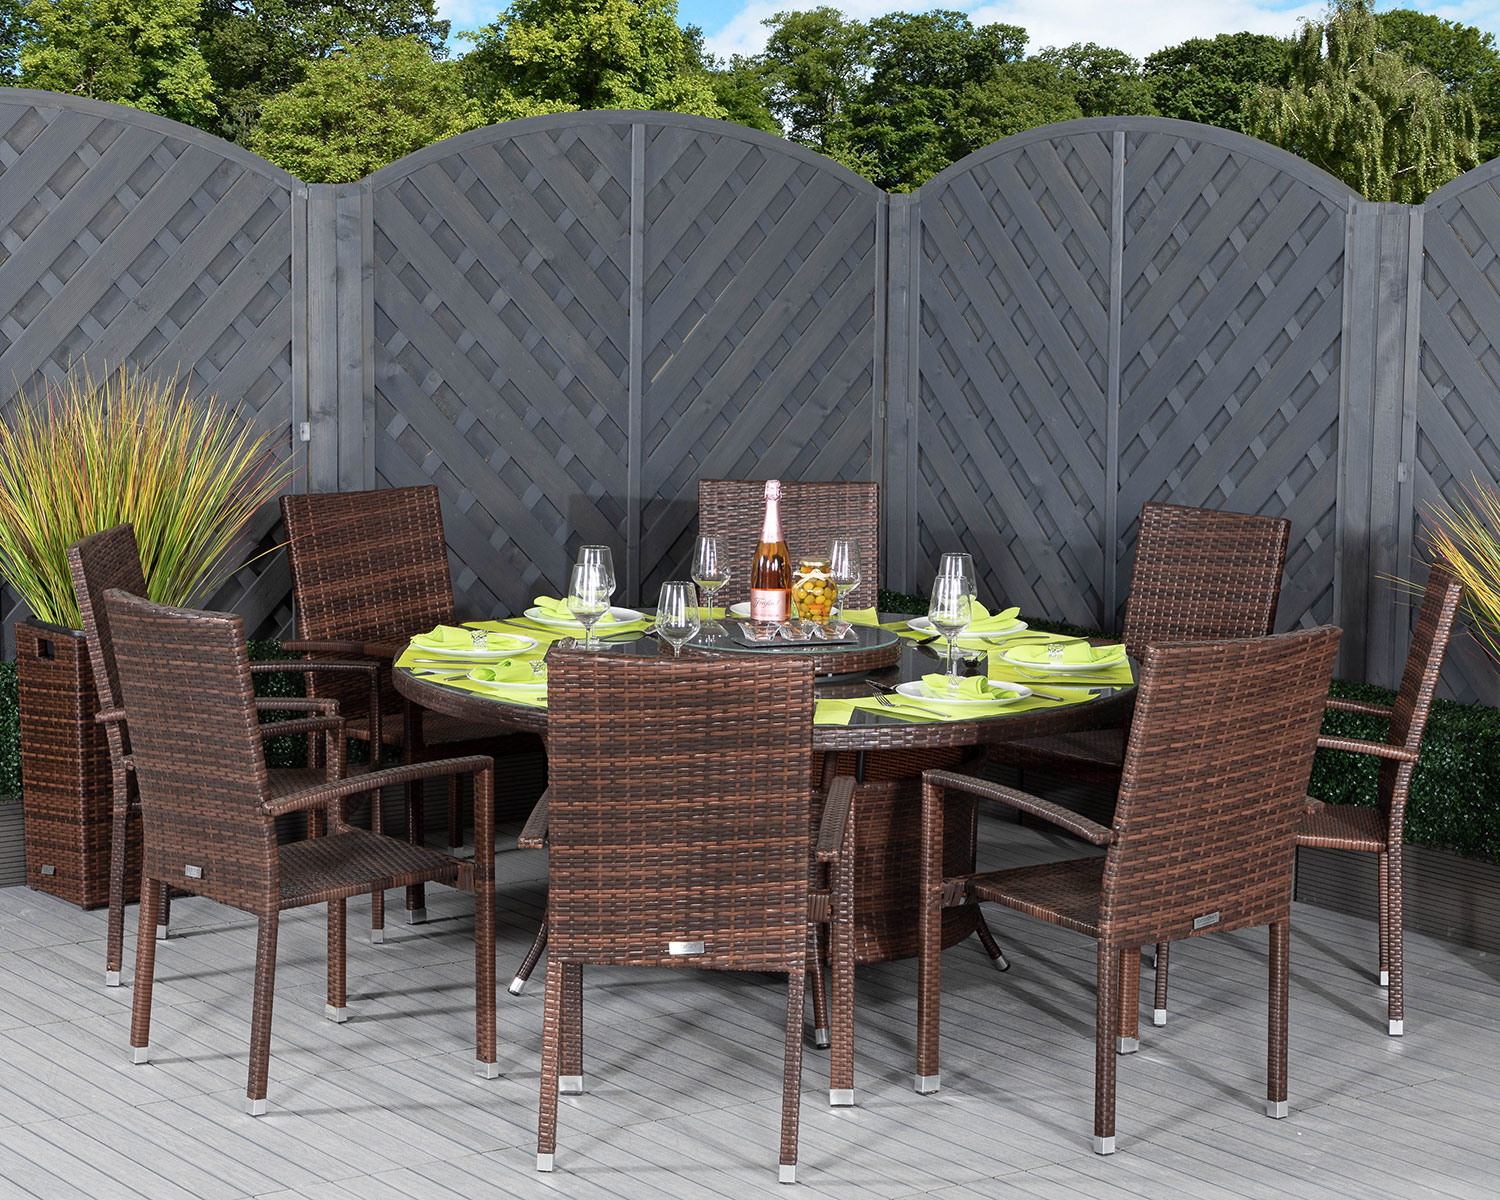 8 Seat Rattan Garden Dining Set With, Large Outdoor Round Dining Table Seats 8